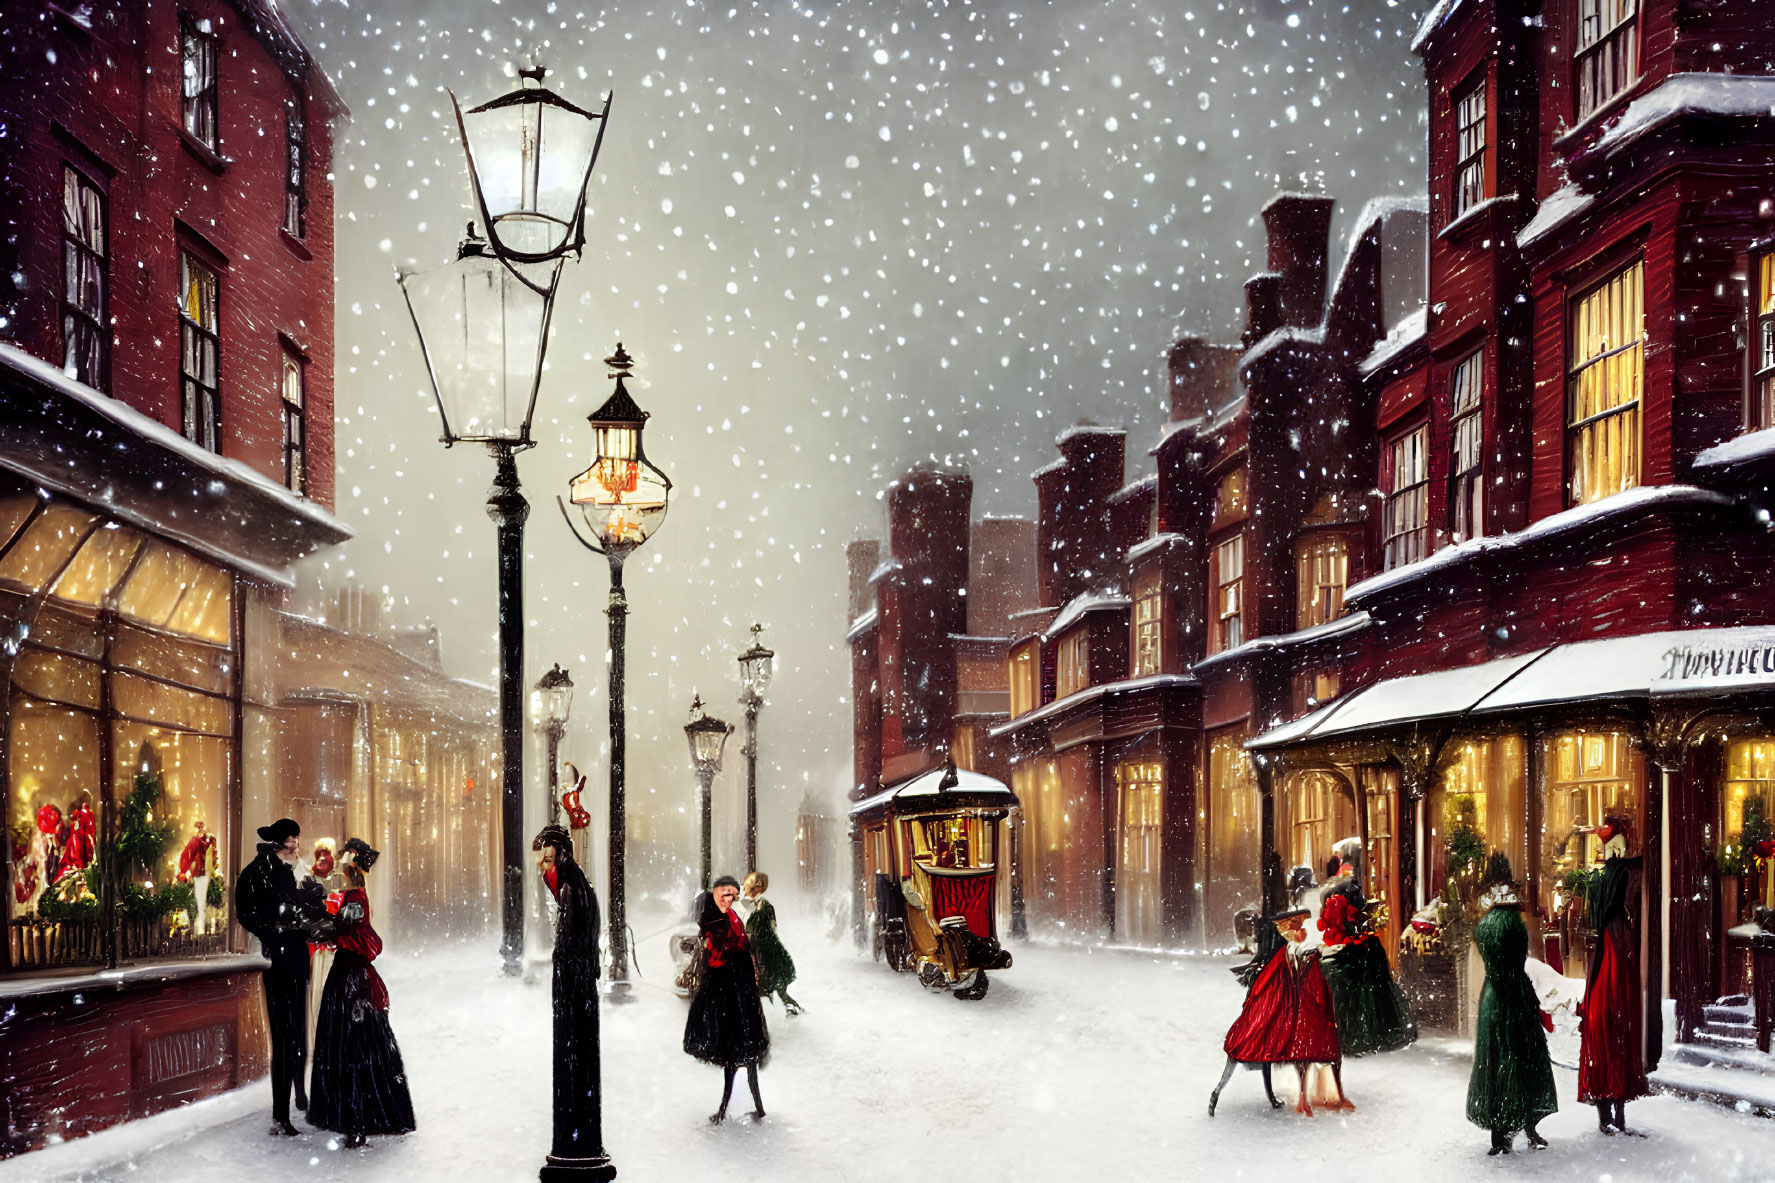 Victorian-era street scene with snow, street lamps, and Christmas decorations